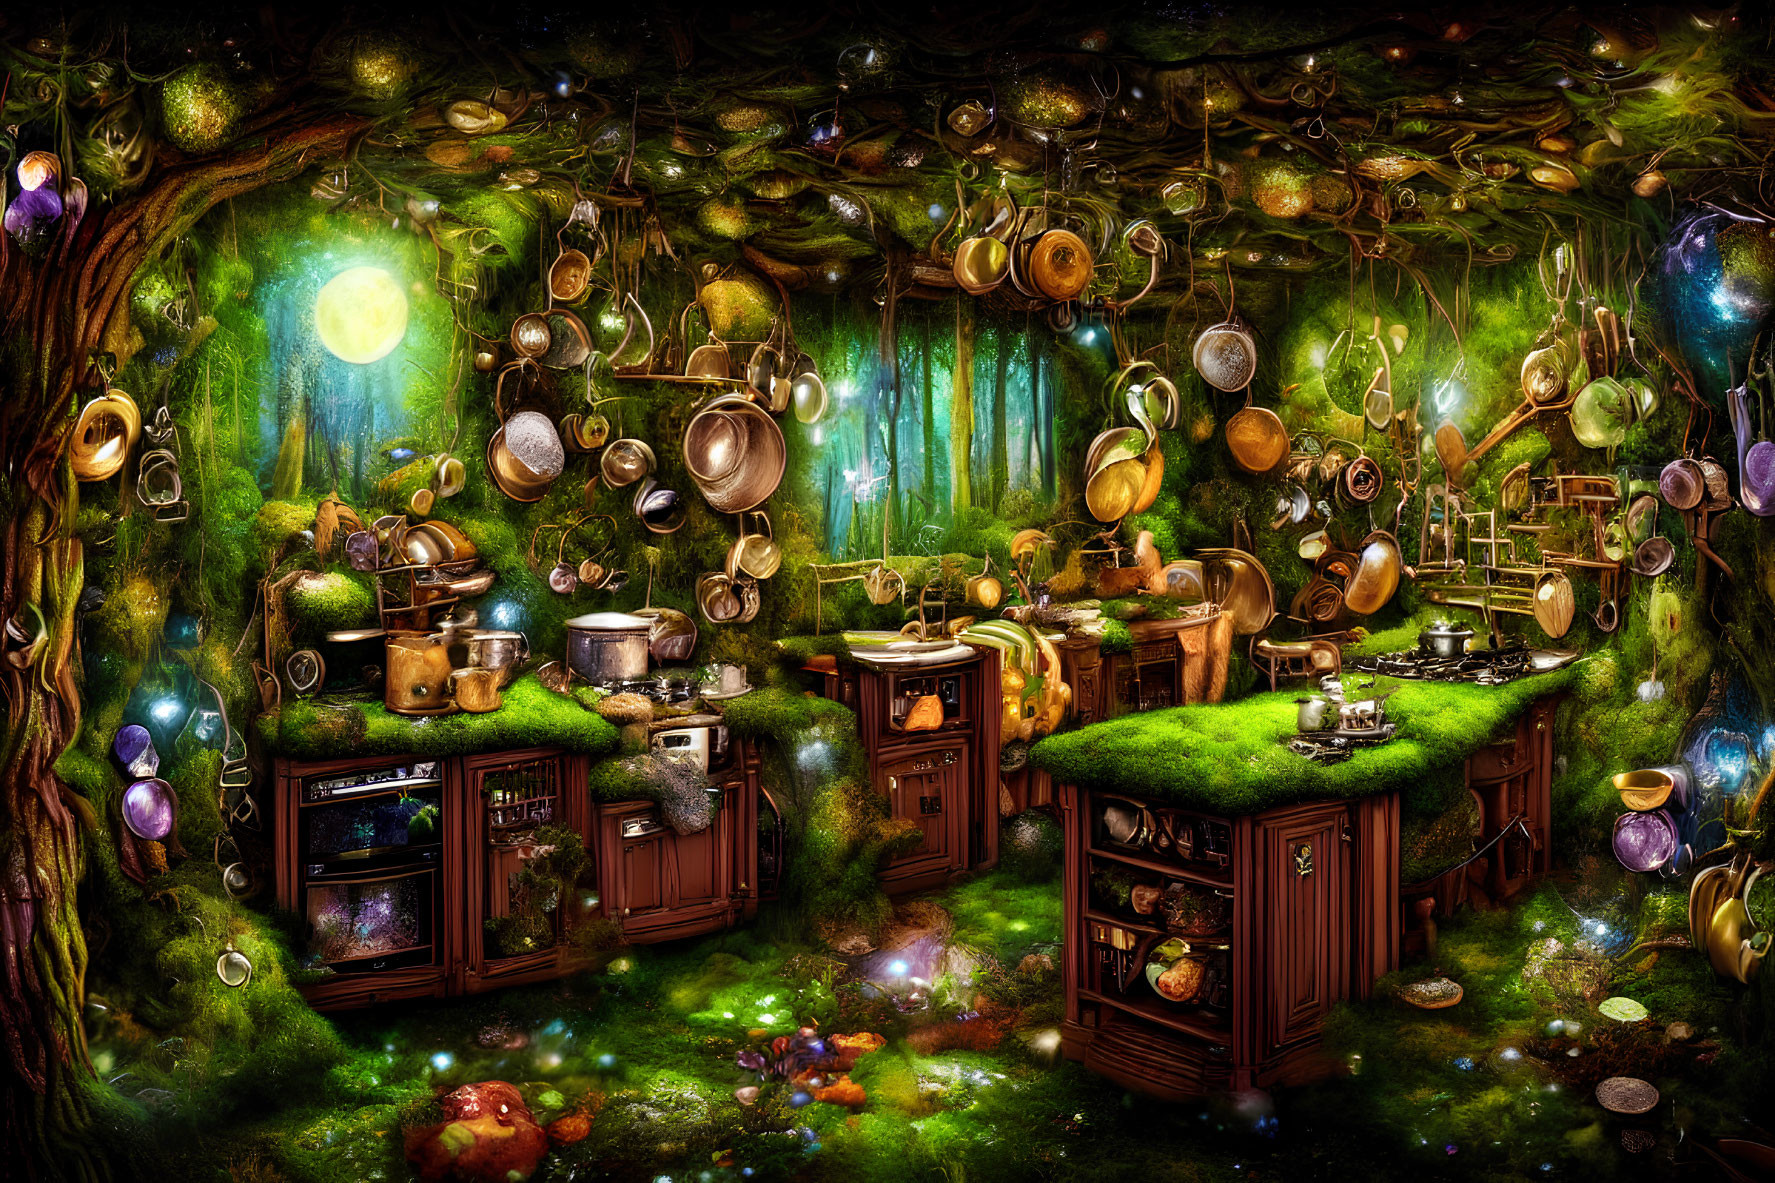 Enchanting kitchen with magical trees, glowing orbs, hanging pots, and pans